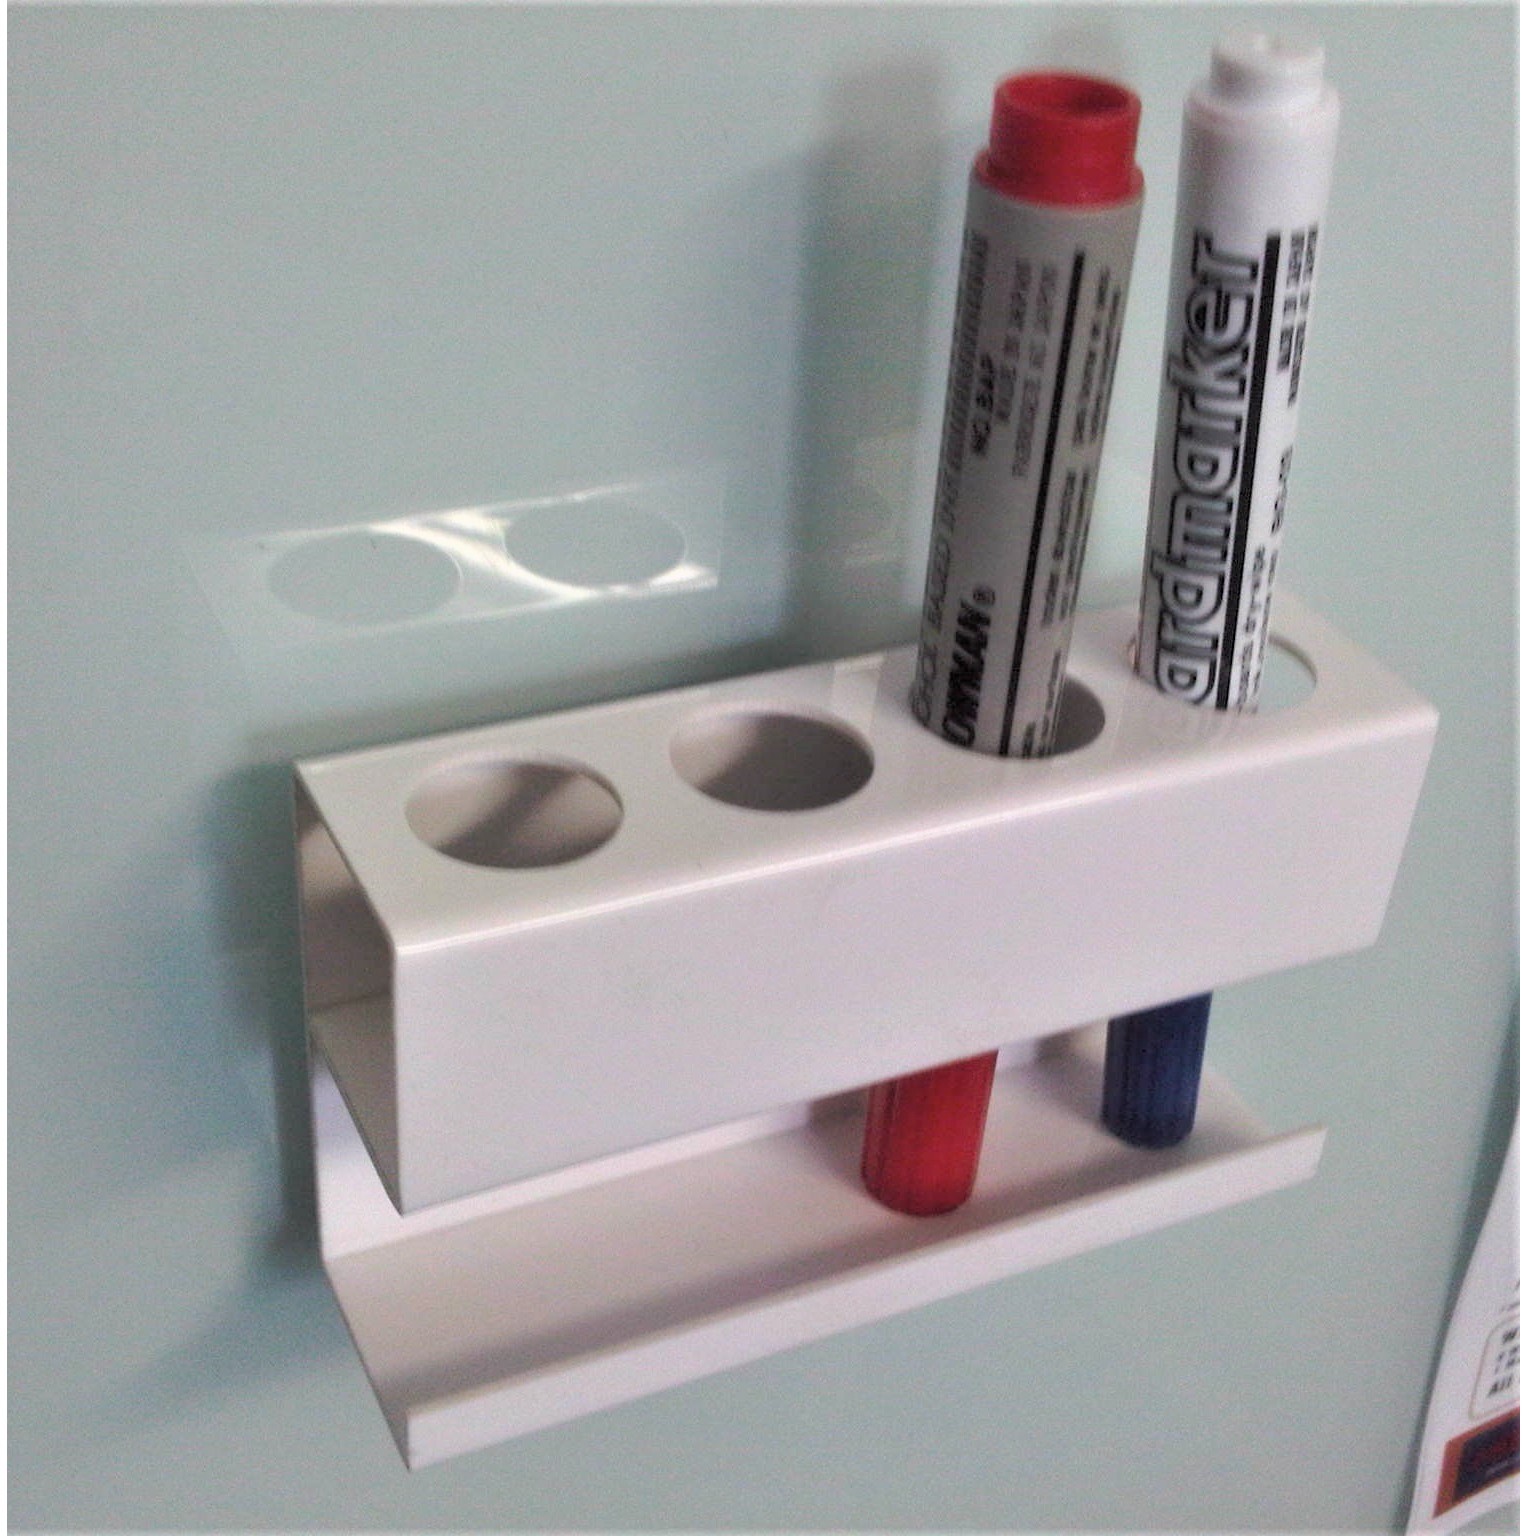 Witax acrylic Wall Mounted magnetic Whiteboards in NZ